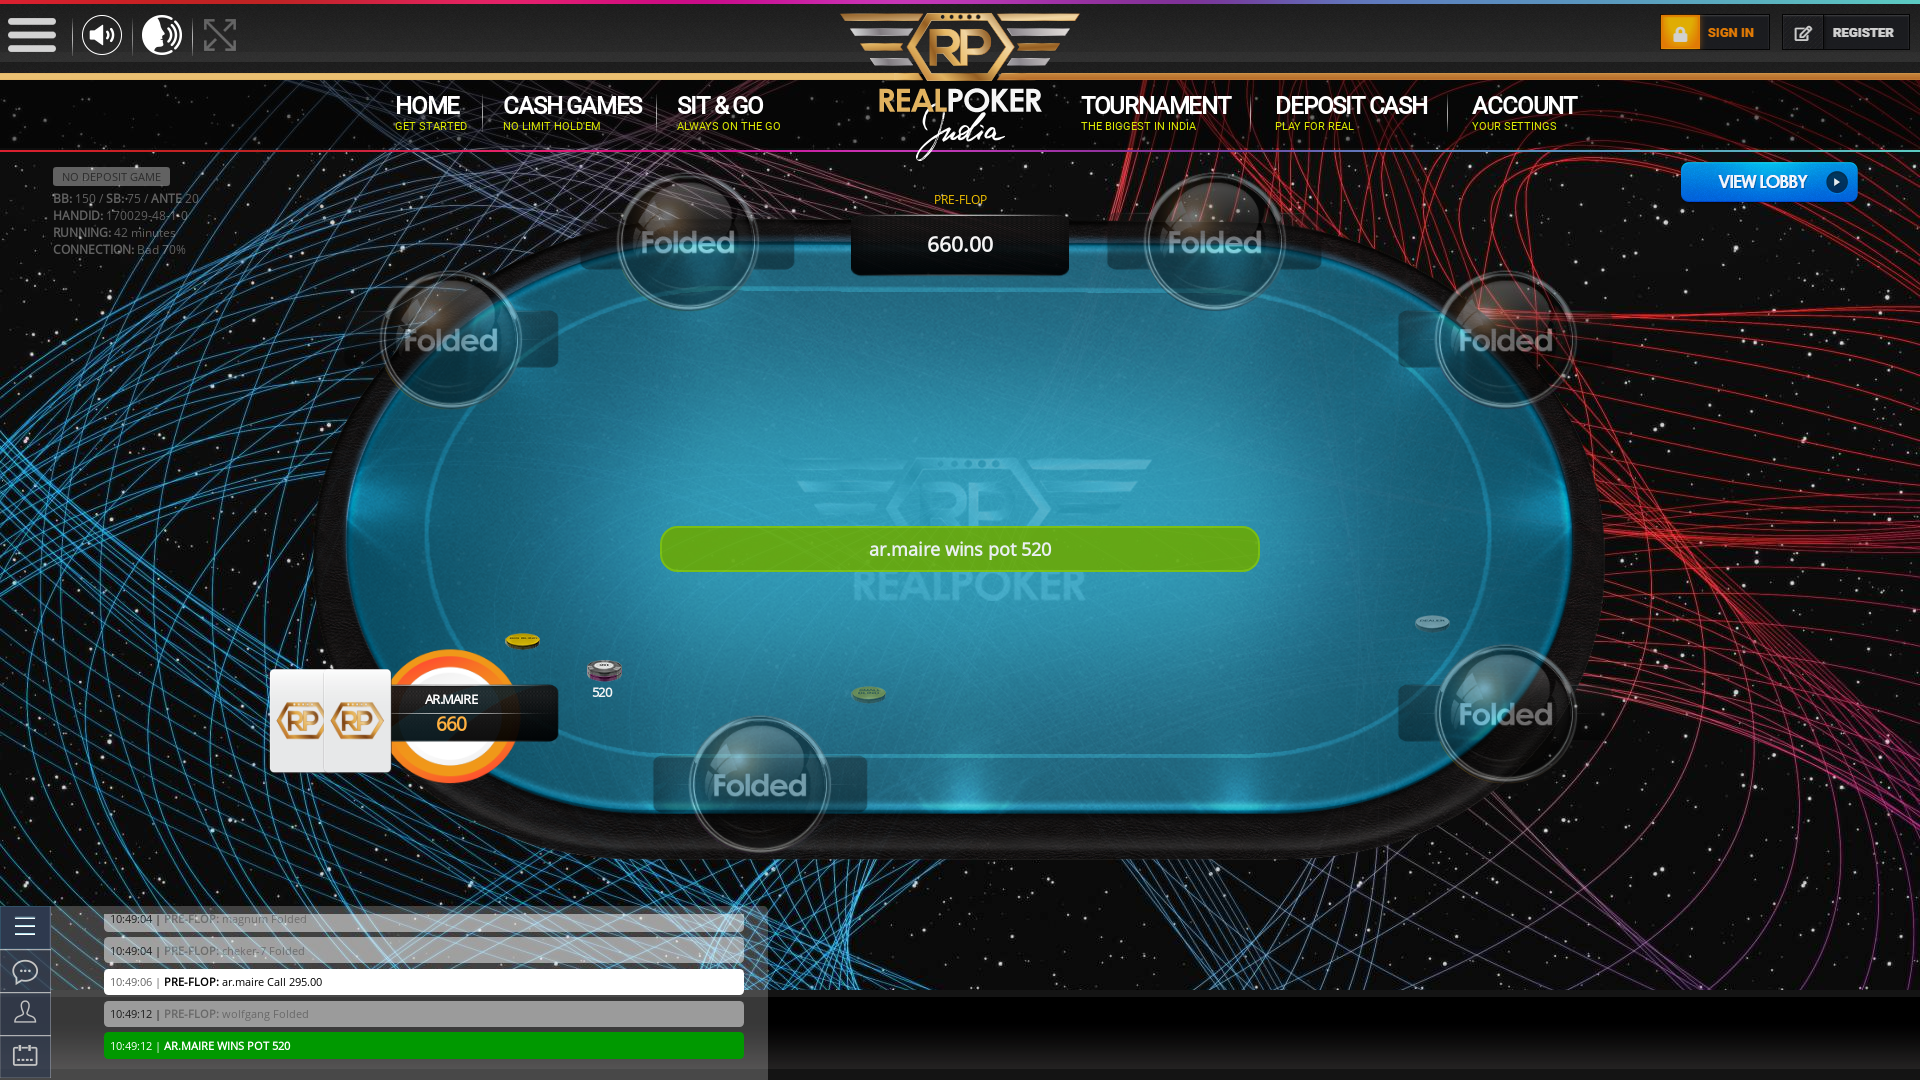 Real poker 10 player table in the 42nd minute